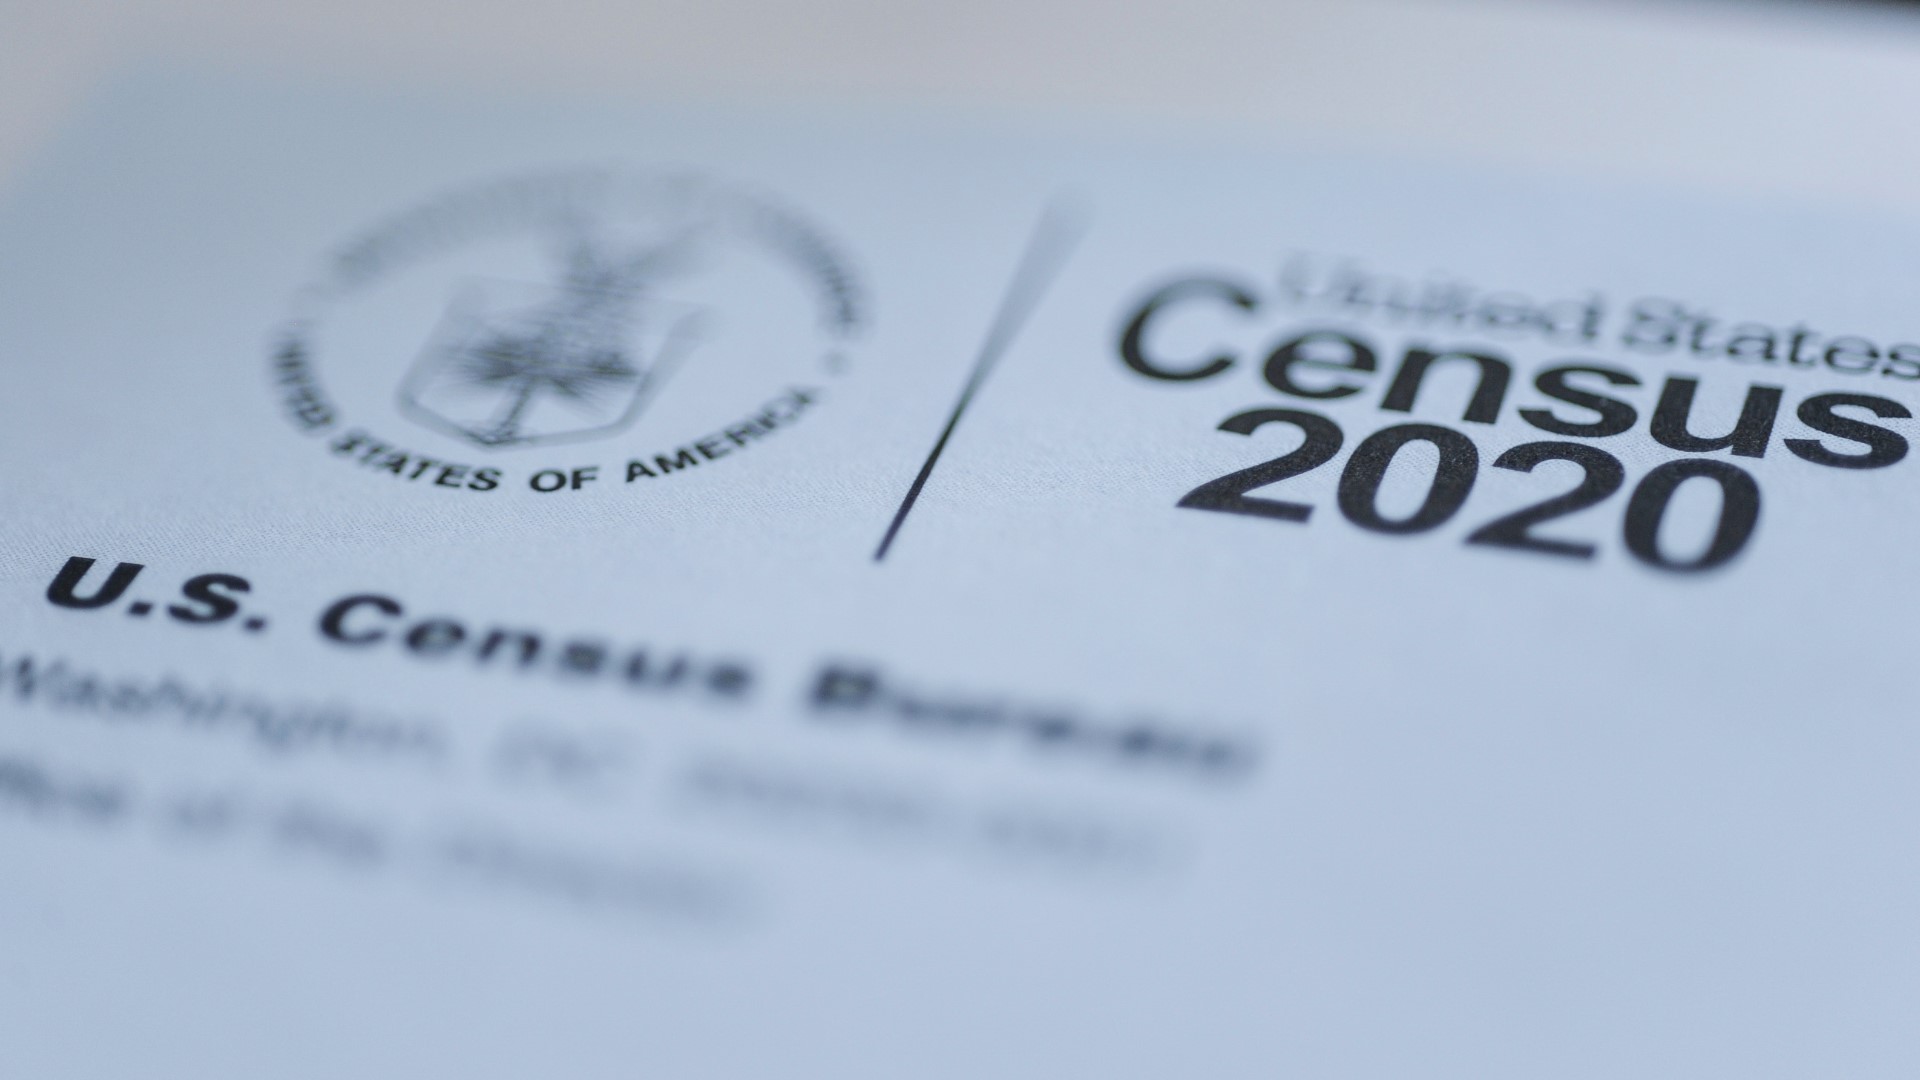 The fast-growing Des Moines suburbs paying for a Census Bureau-run second count in 2024 are Altoona, Bondurant, Grimes, Johnston, Norwalk, Pleasant Hill and Waukee.